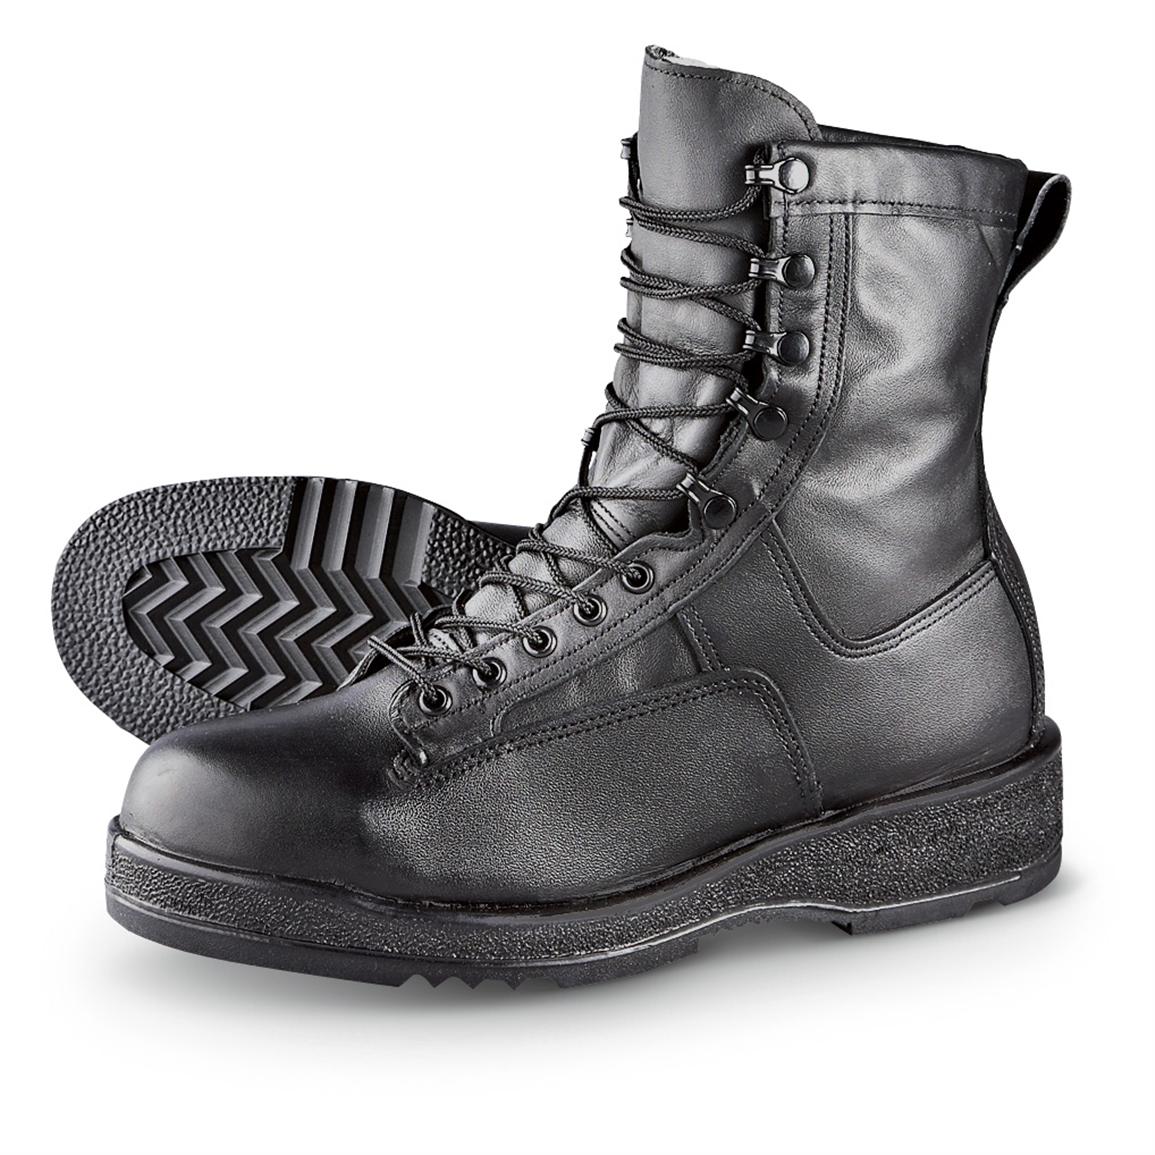 US Navy Flight Deck Boots The Ultimate Footwear for Maritime